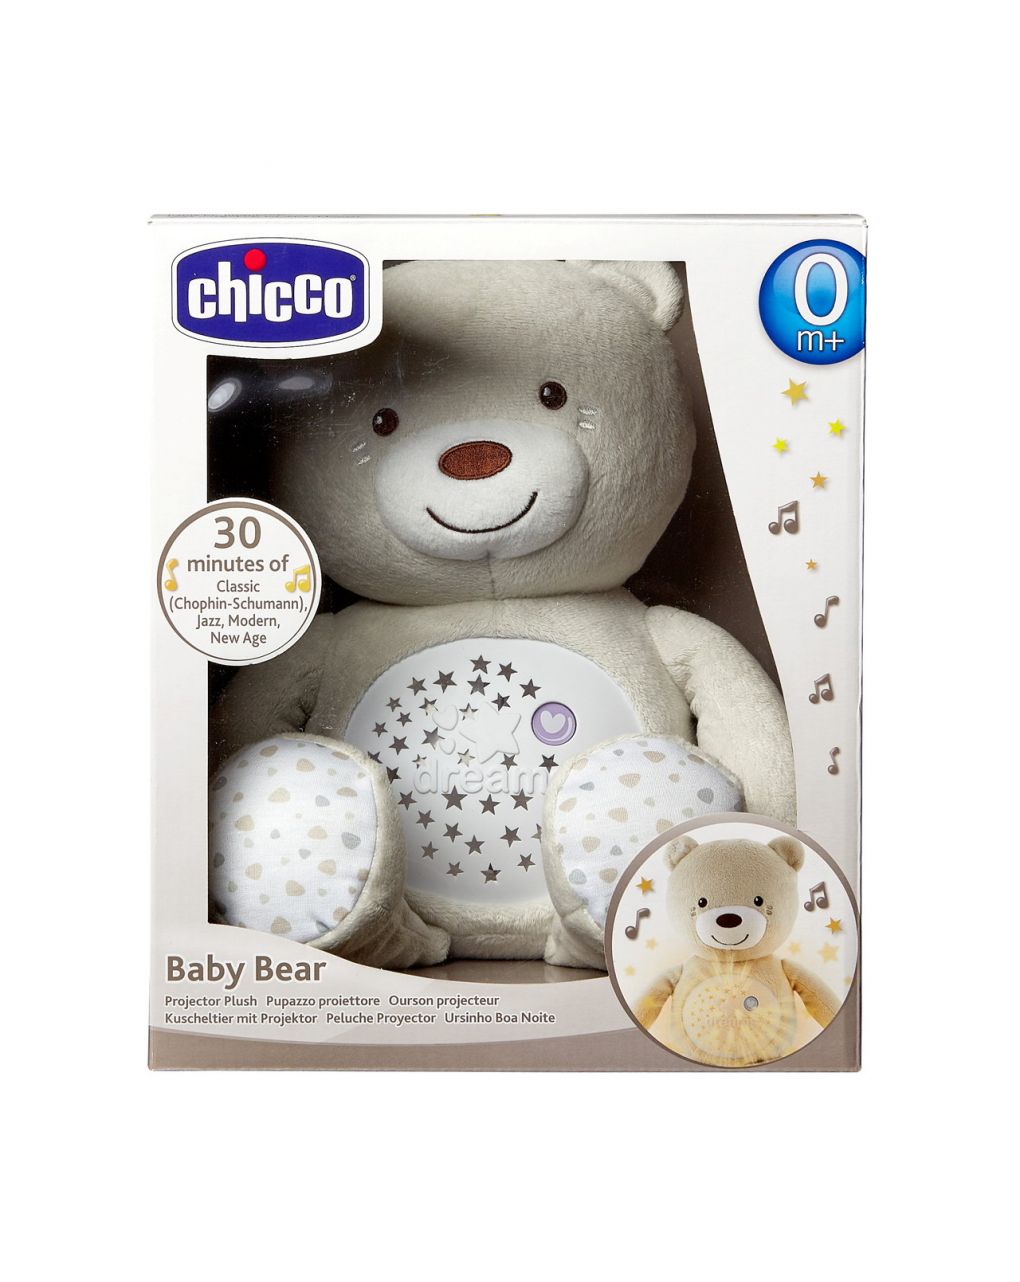 Chicco toy fd baby bear neutral - Chicco